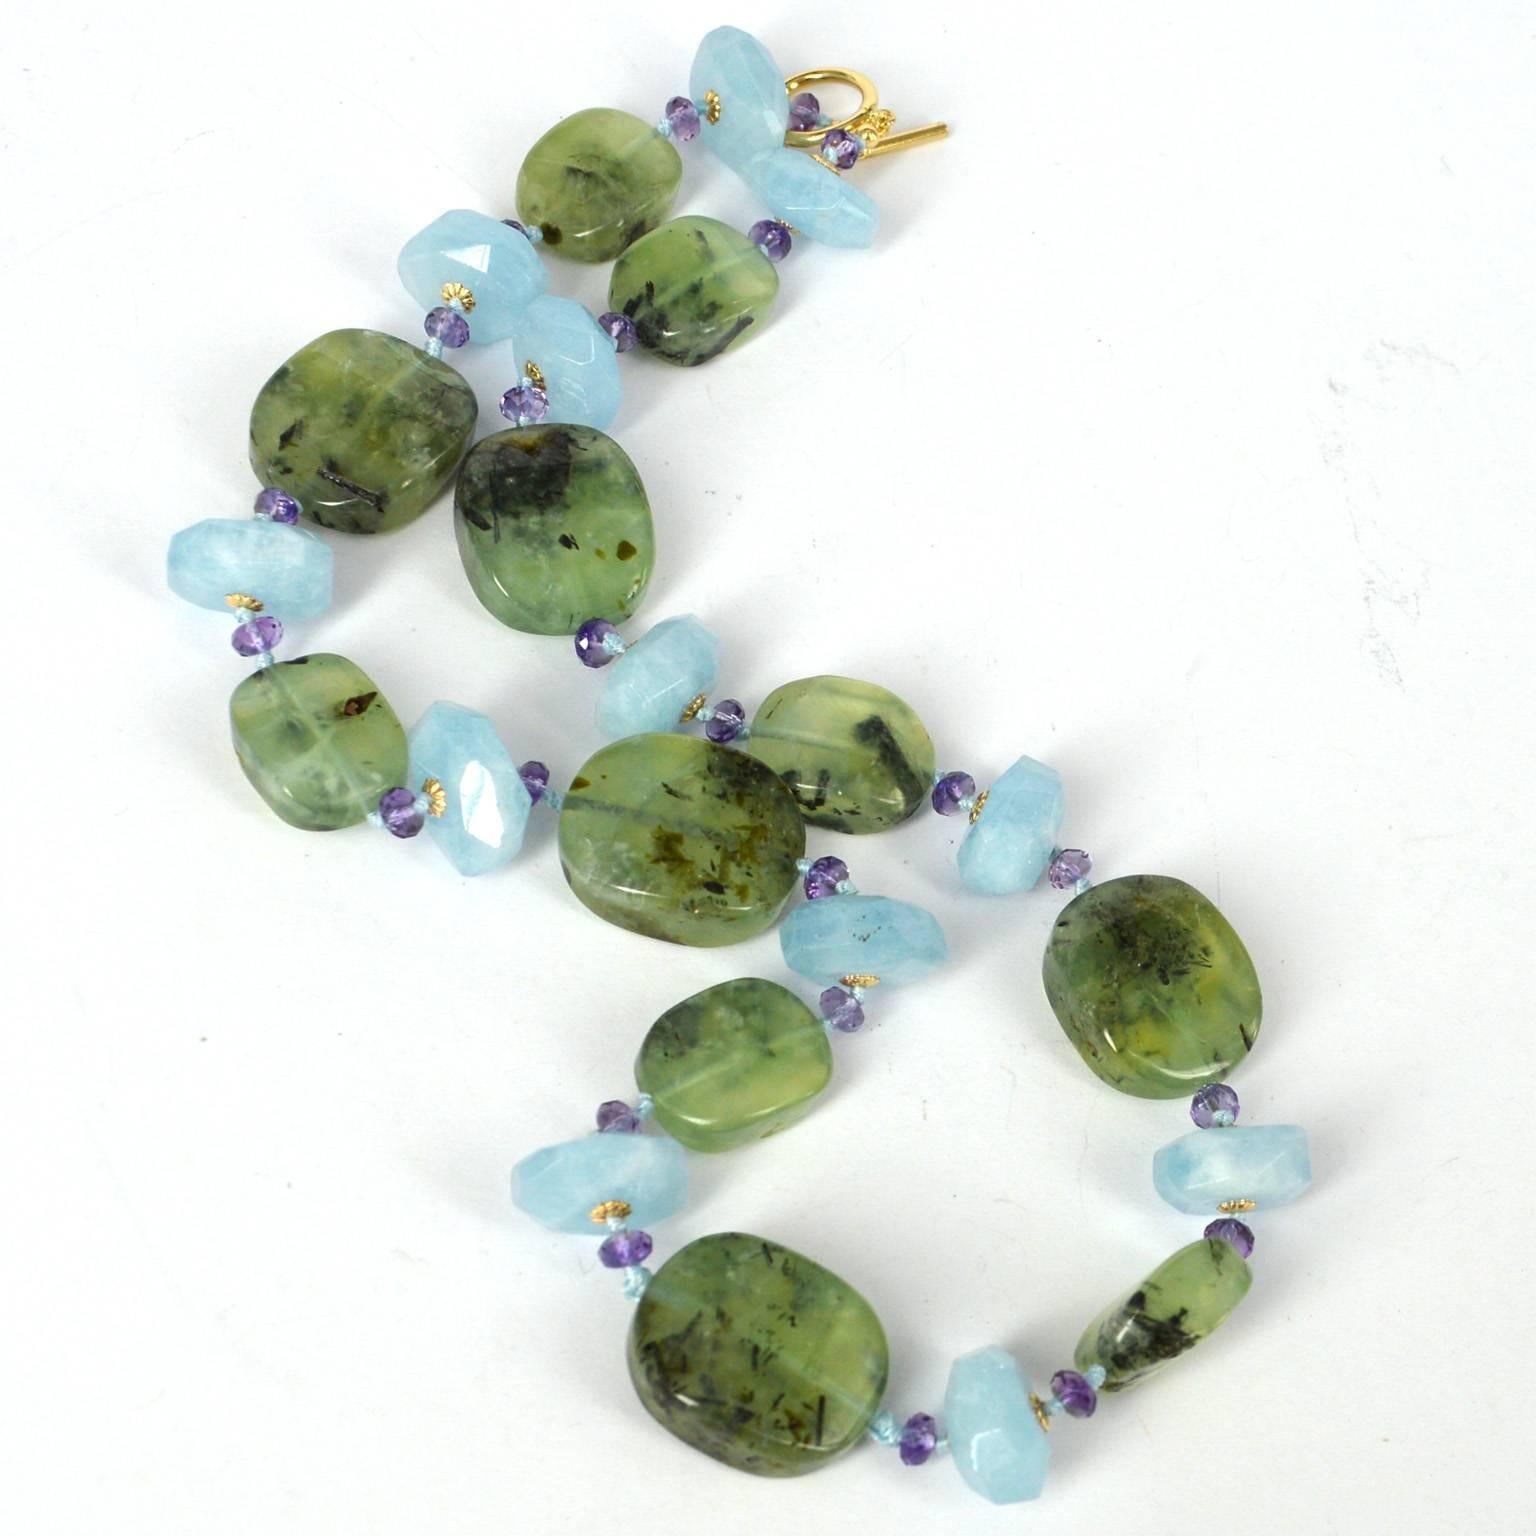 Statement necklace with a mix of polished pillows of Prehnite 20x25mm and 15x19mm spaced with 4x3mm Faceted Amethyst and 8x15mm faceted Aquamarine beads, hand knotted for strength and durability on turquoise coloured thread.  
Finished with a 14mm